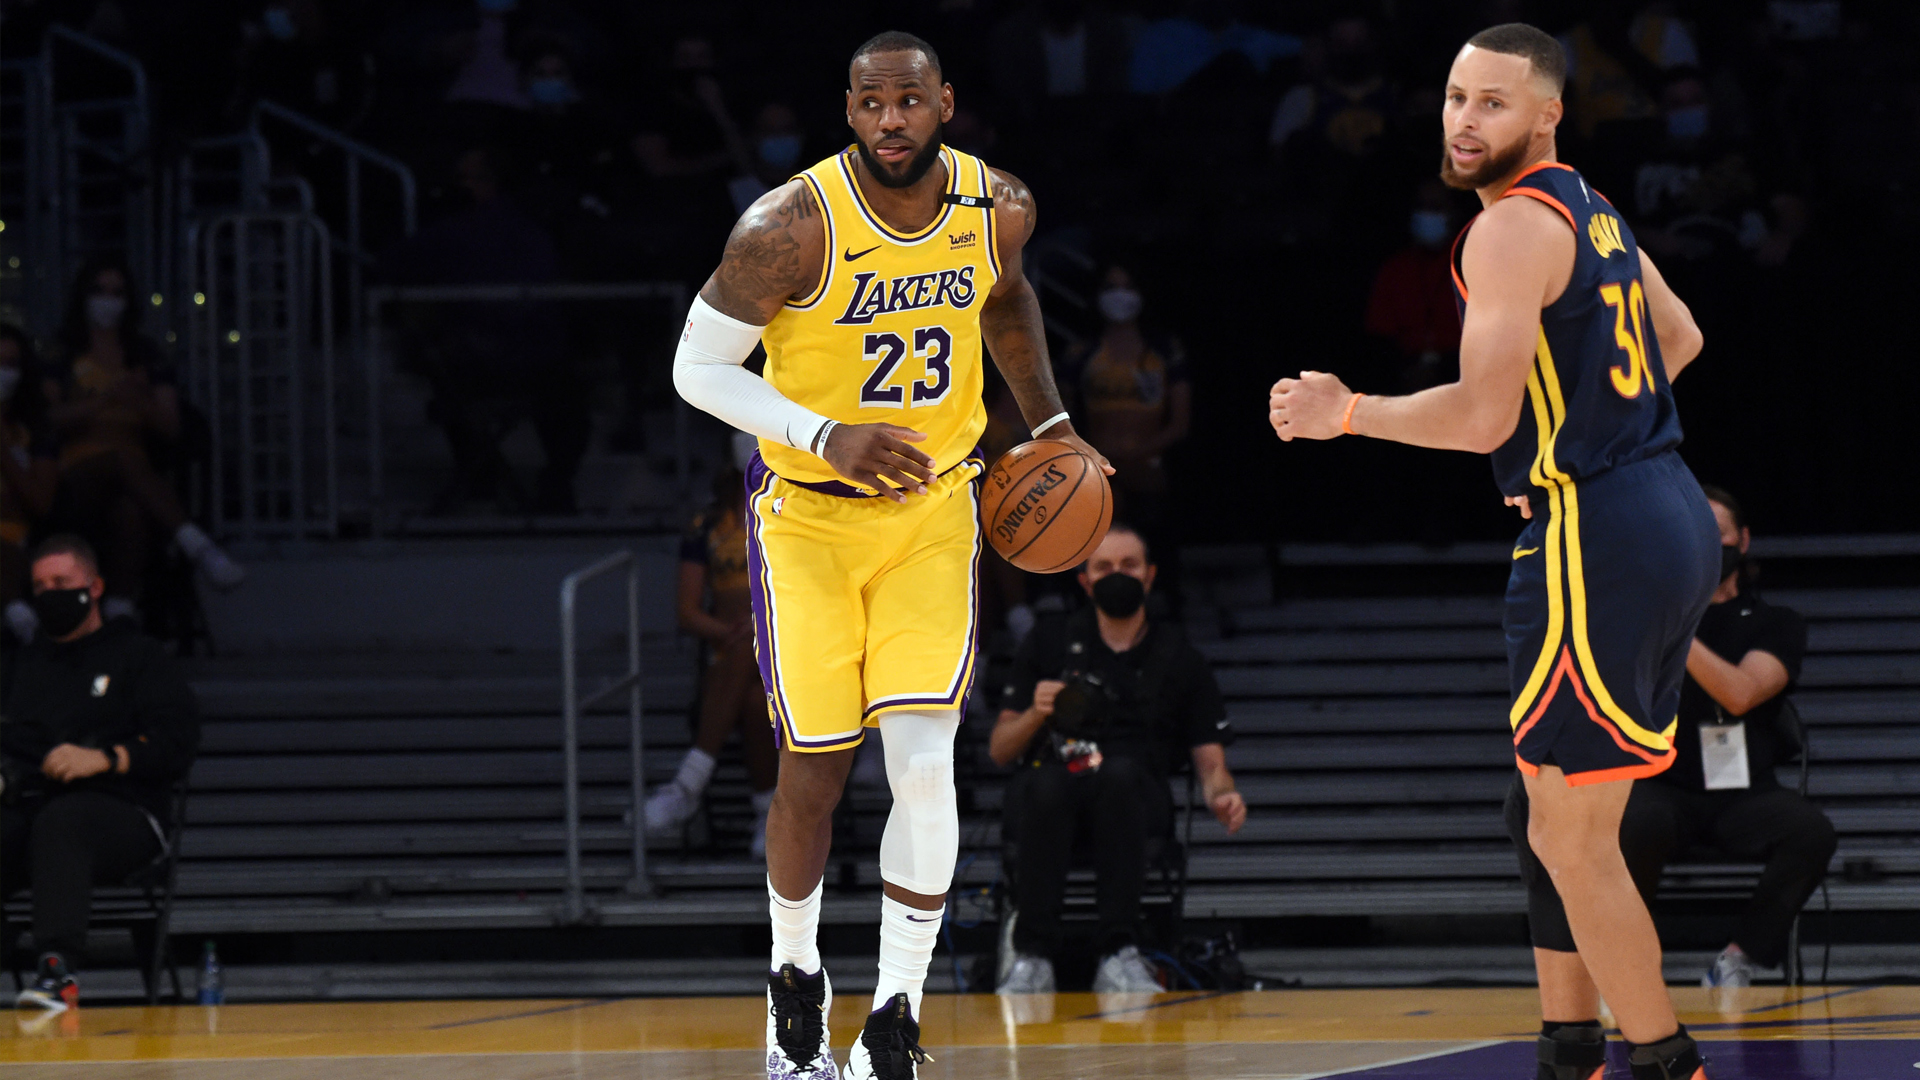 Warriors-Lakers rematch set up for 2021 NBA Opening Night – NBC